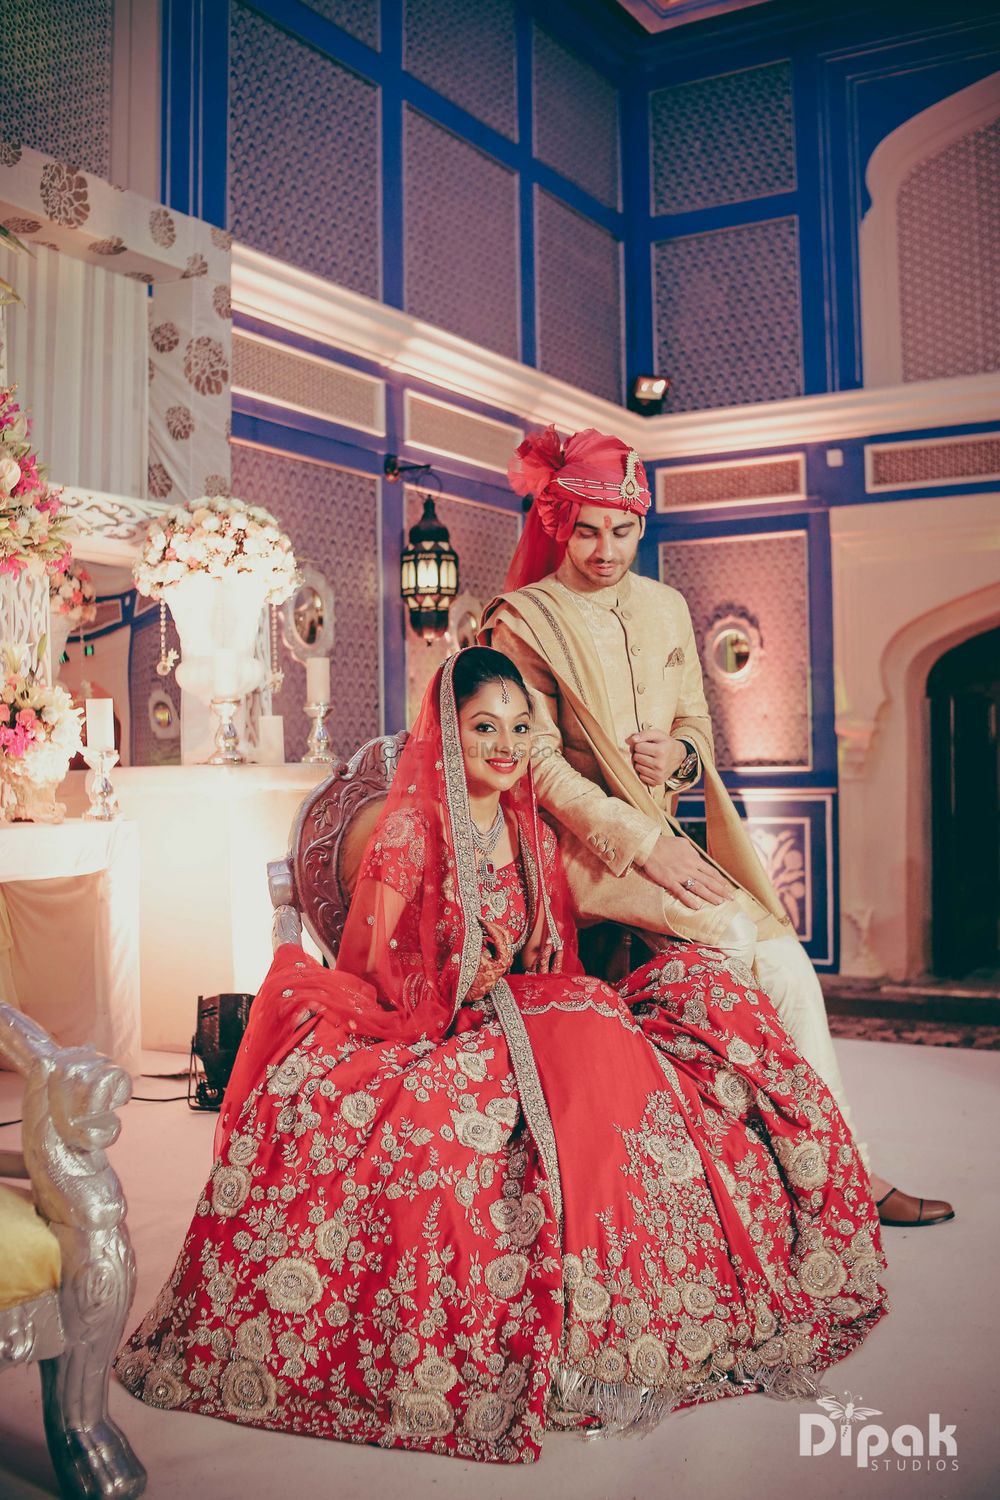 Photo of Bride Posing in Bright Red Flared Lehenga on Stage